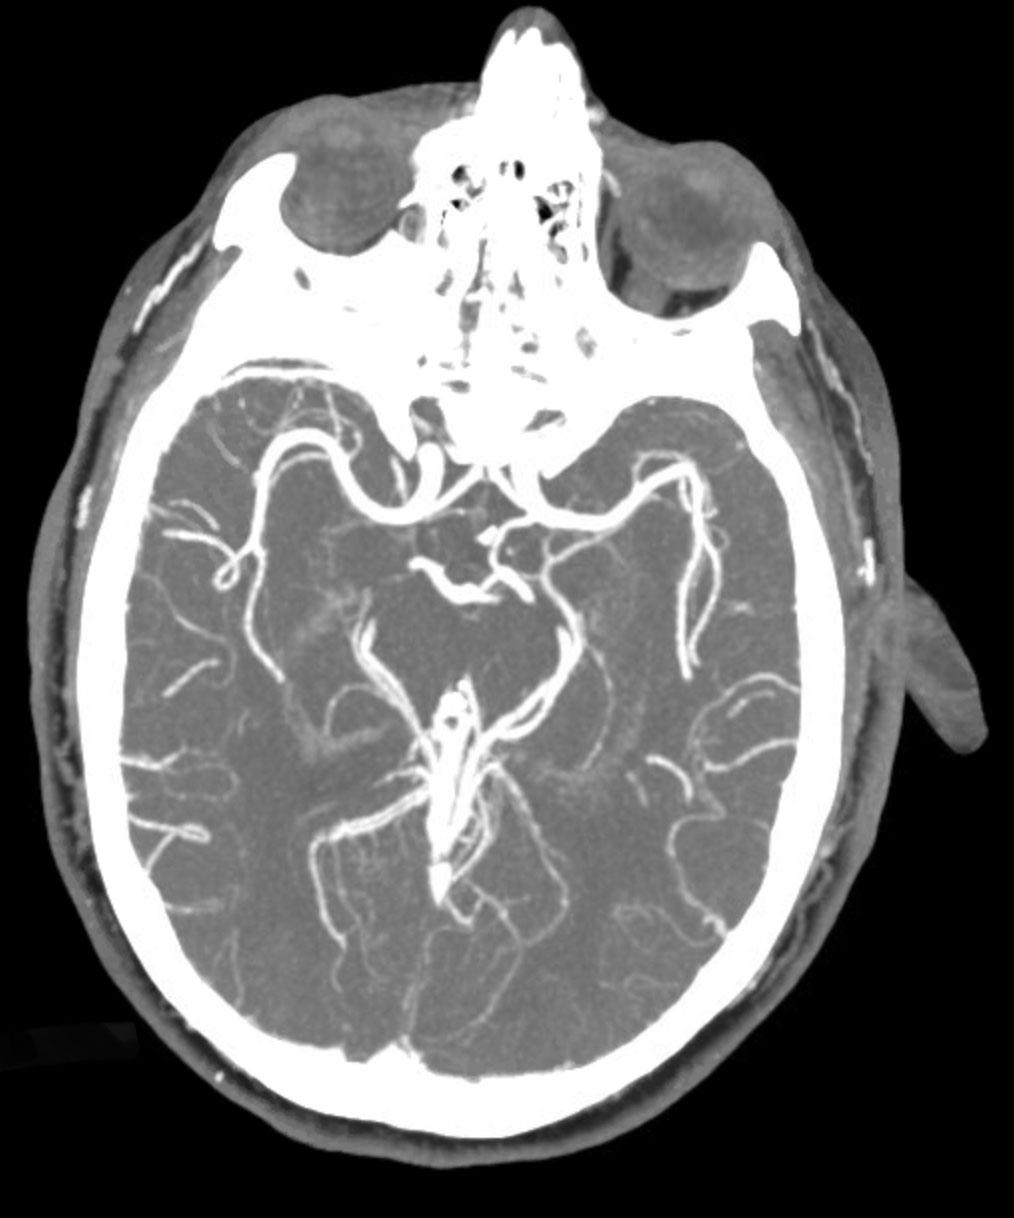 A well-timed CTA can rule out an ischemic or hemorrhagic event for your patient.